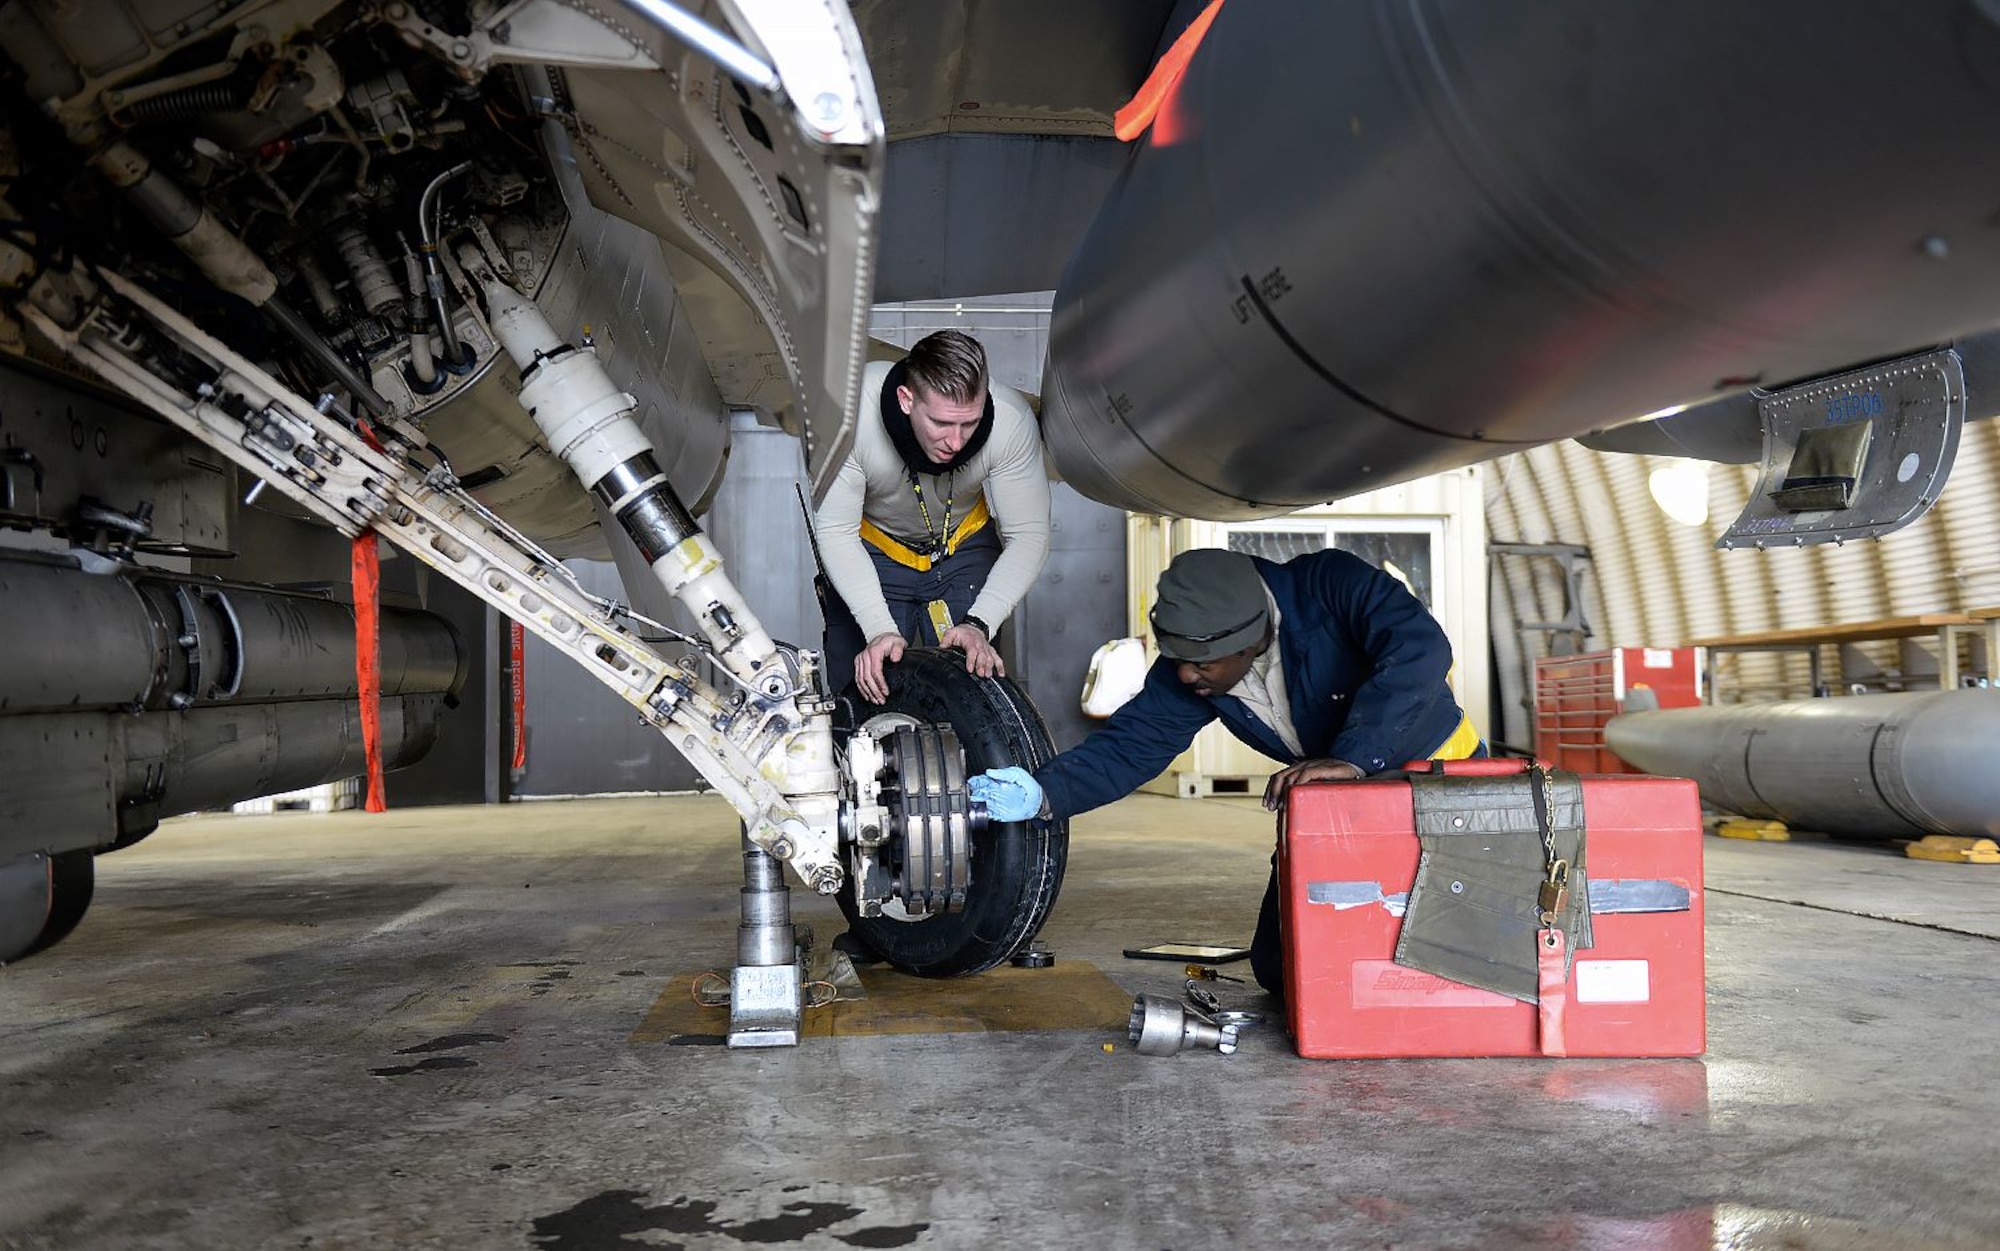 U.S. Air Force Staff Sgt. William Horne and Senior Airman Isiah Bishop, 80th Fighter Squadron crew chiefs, change a left main-tire Jan. 10, 2018, at Kunsan Air Base, Republic of Korea. The crew chiefs and maintainers who work on swing shift to keep the 80th Fighter Squadron mission ready have a saying that reminds them no matter the weather condition, they have a job to do, and they'll “do it better than you." (U.S. Air Force photo by Senior Airman Colby L. Hardin)